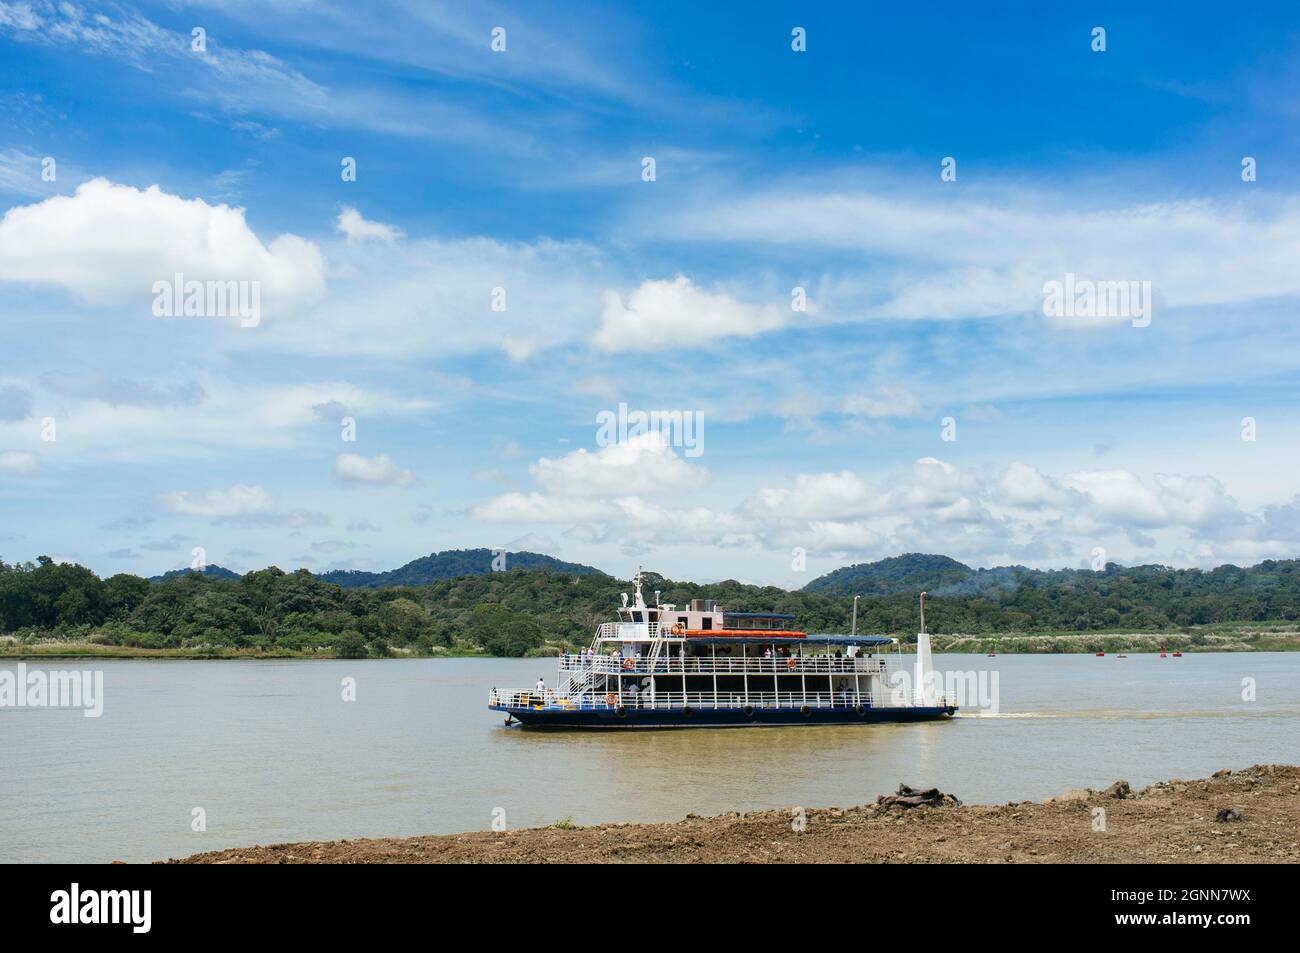 Panama Canal, Panama. September 25, 2021. Tourist ferry visiting the Panama Canal at the height of the Gamboa village. Stock Photo